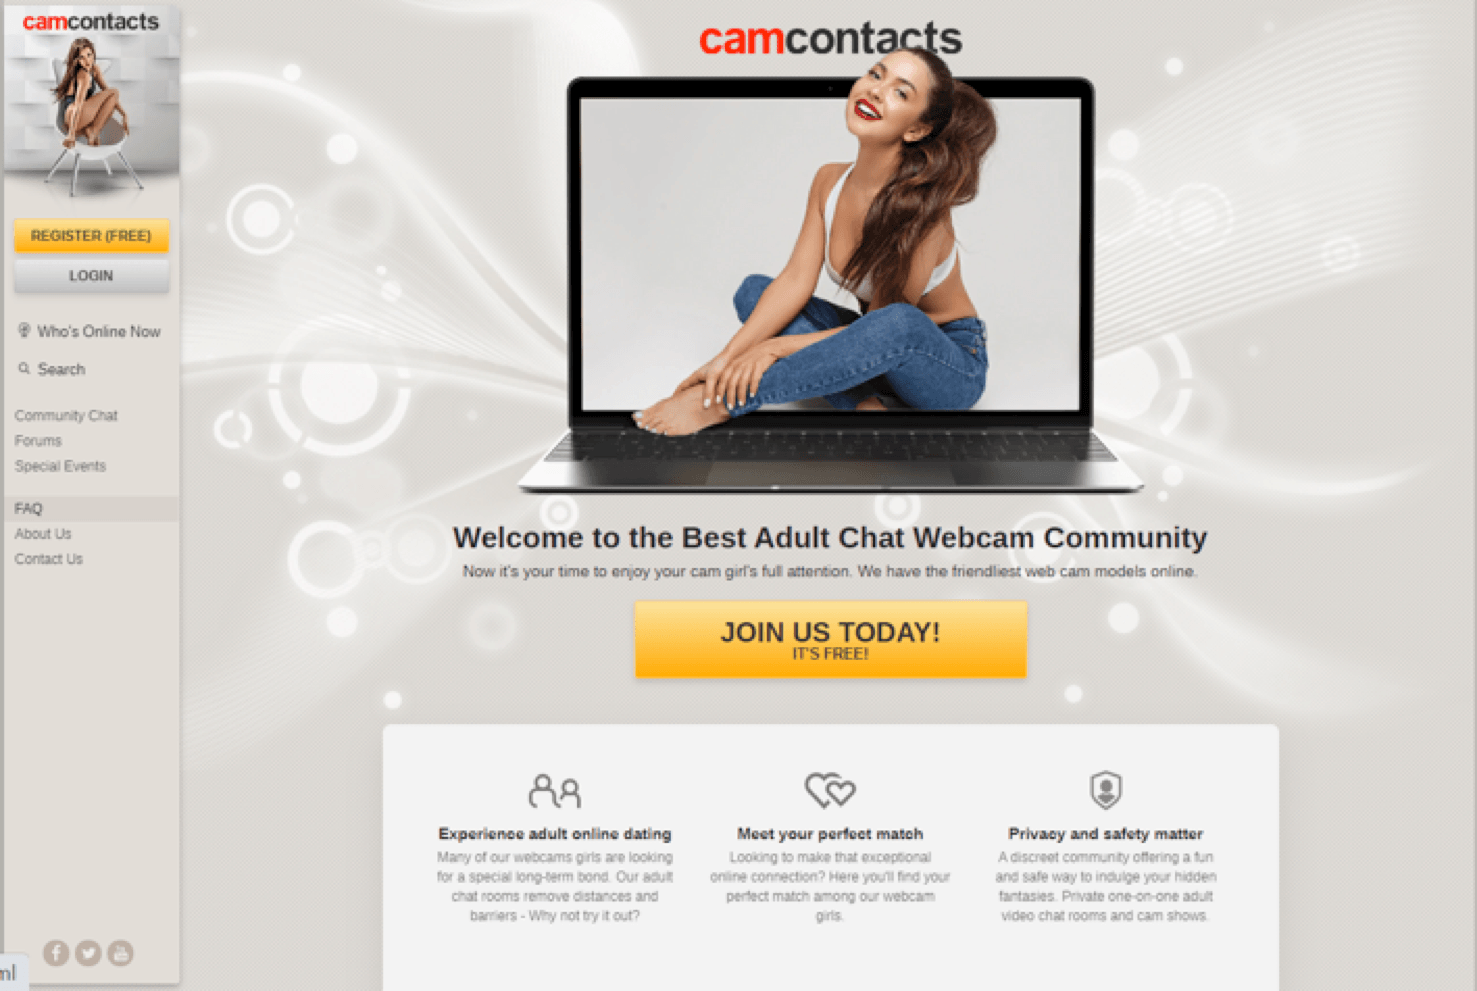 Design review of CamContacts